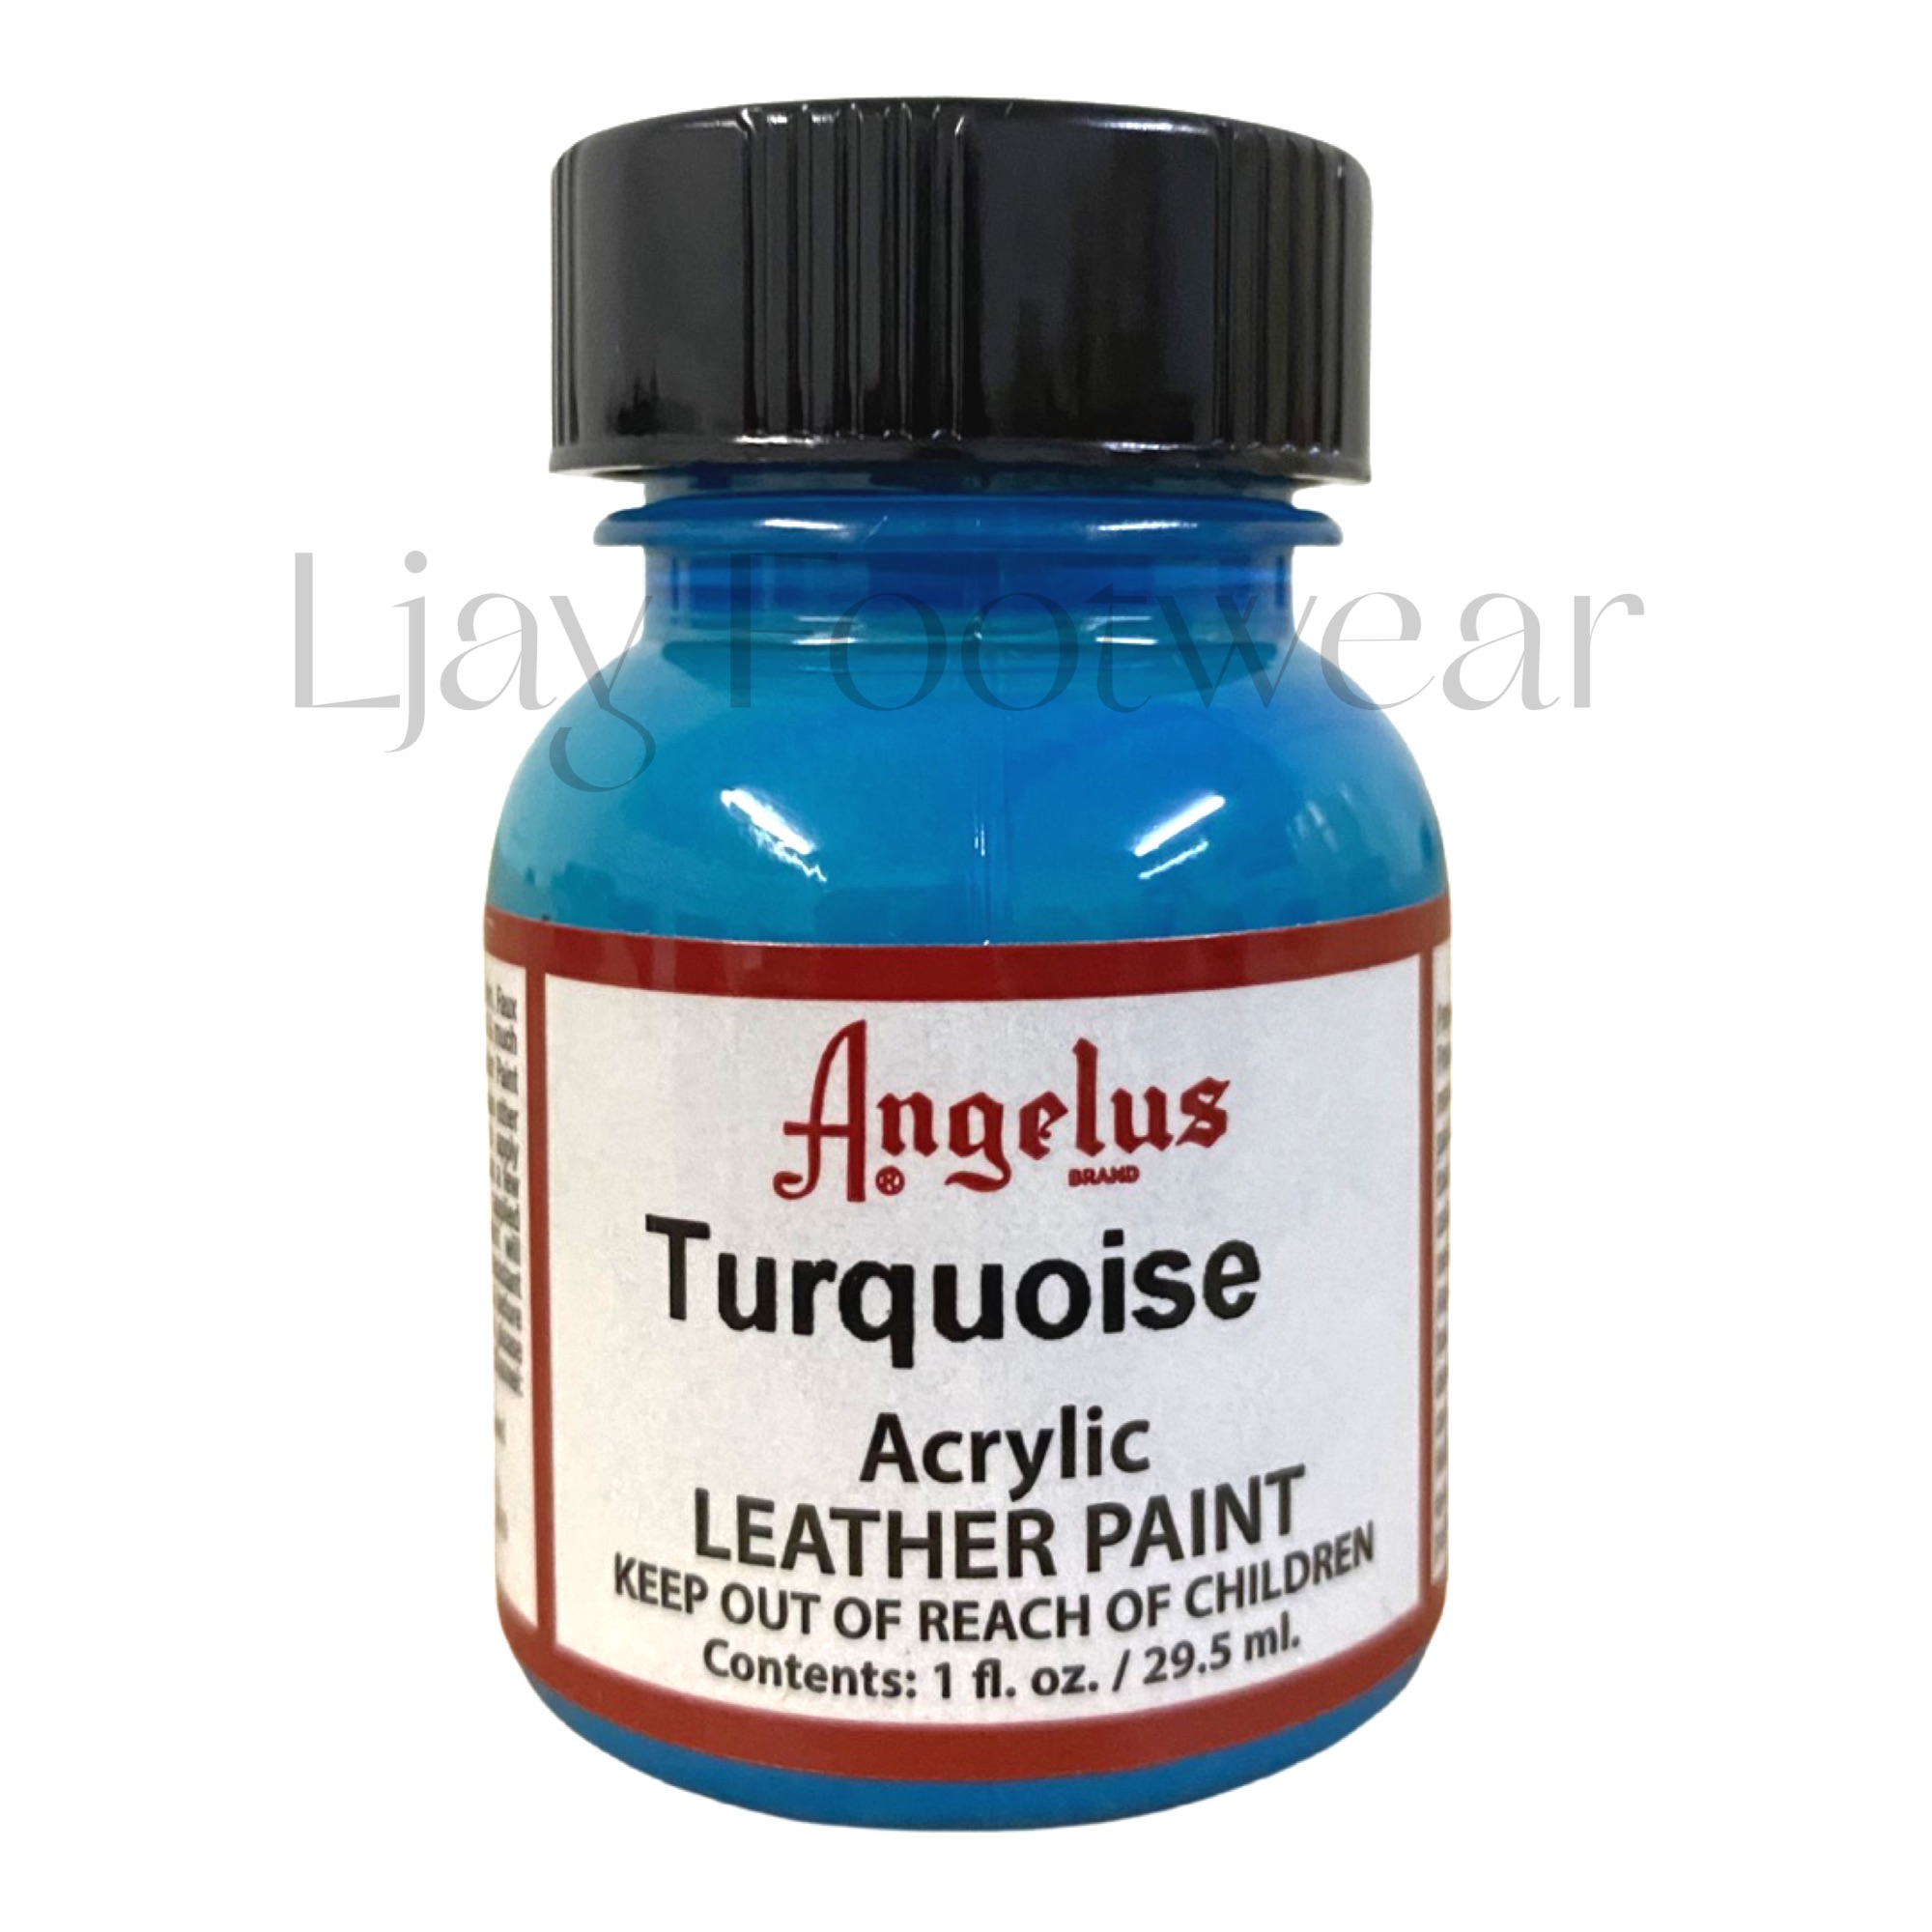 ANGELUS ACRYLIC PAINT CUSTOM PAINT Fire Red Leather Paint Swatch Made in  USA Trusted brand since 1907